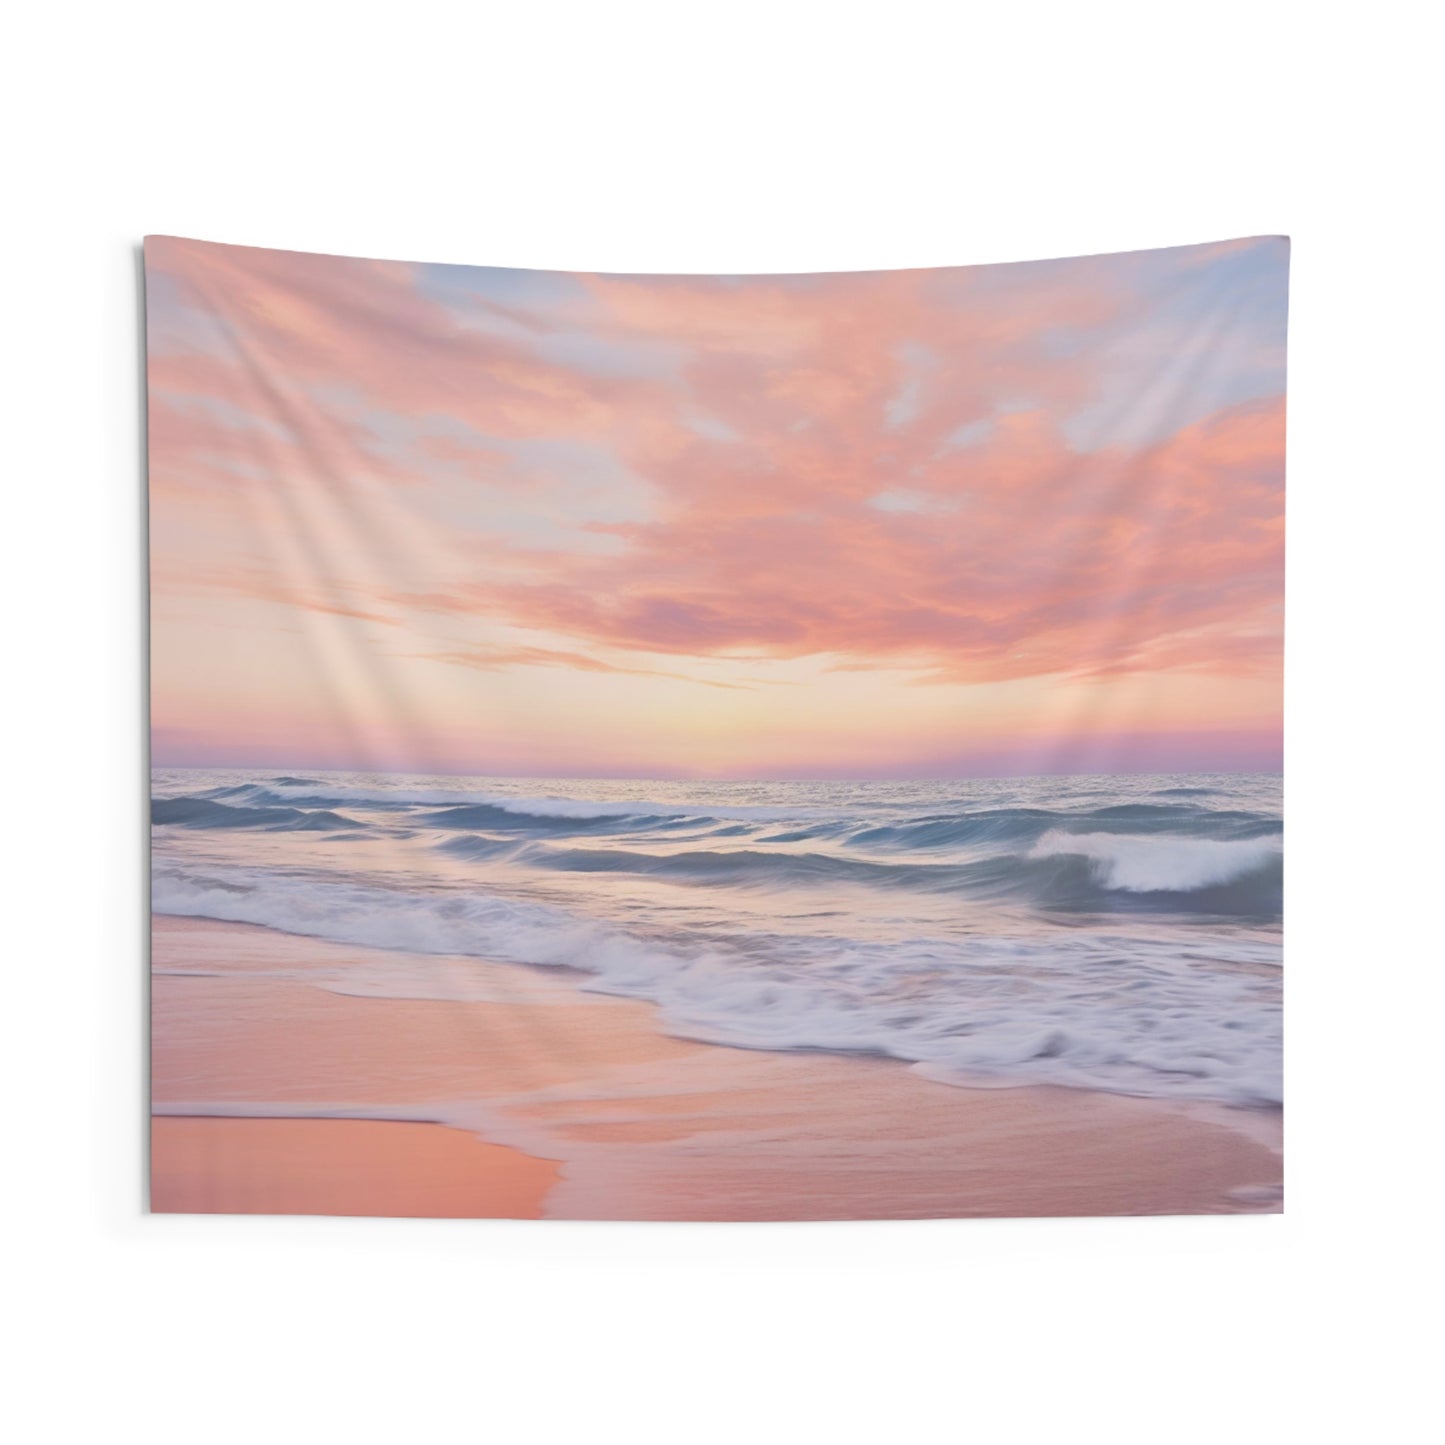 Light Pink Sunset Tapestry, Beach Ocean Wall Art Hanging Cool Unique Landscape Aesthetic Large Small Decor Bedroom College Dorm Room Starcove Fashion